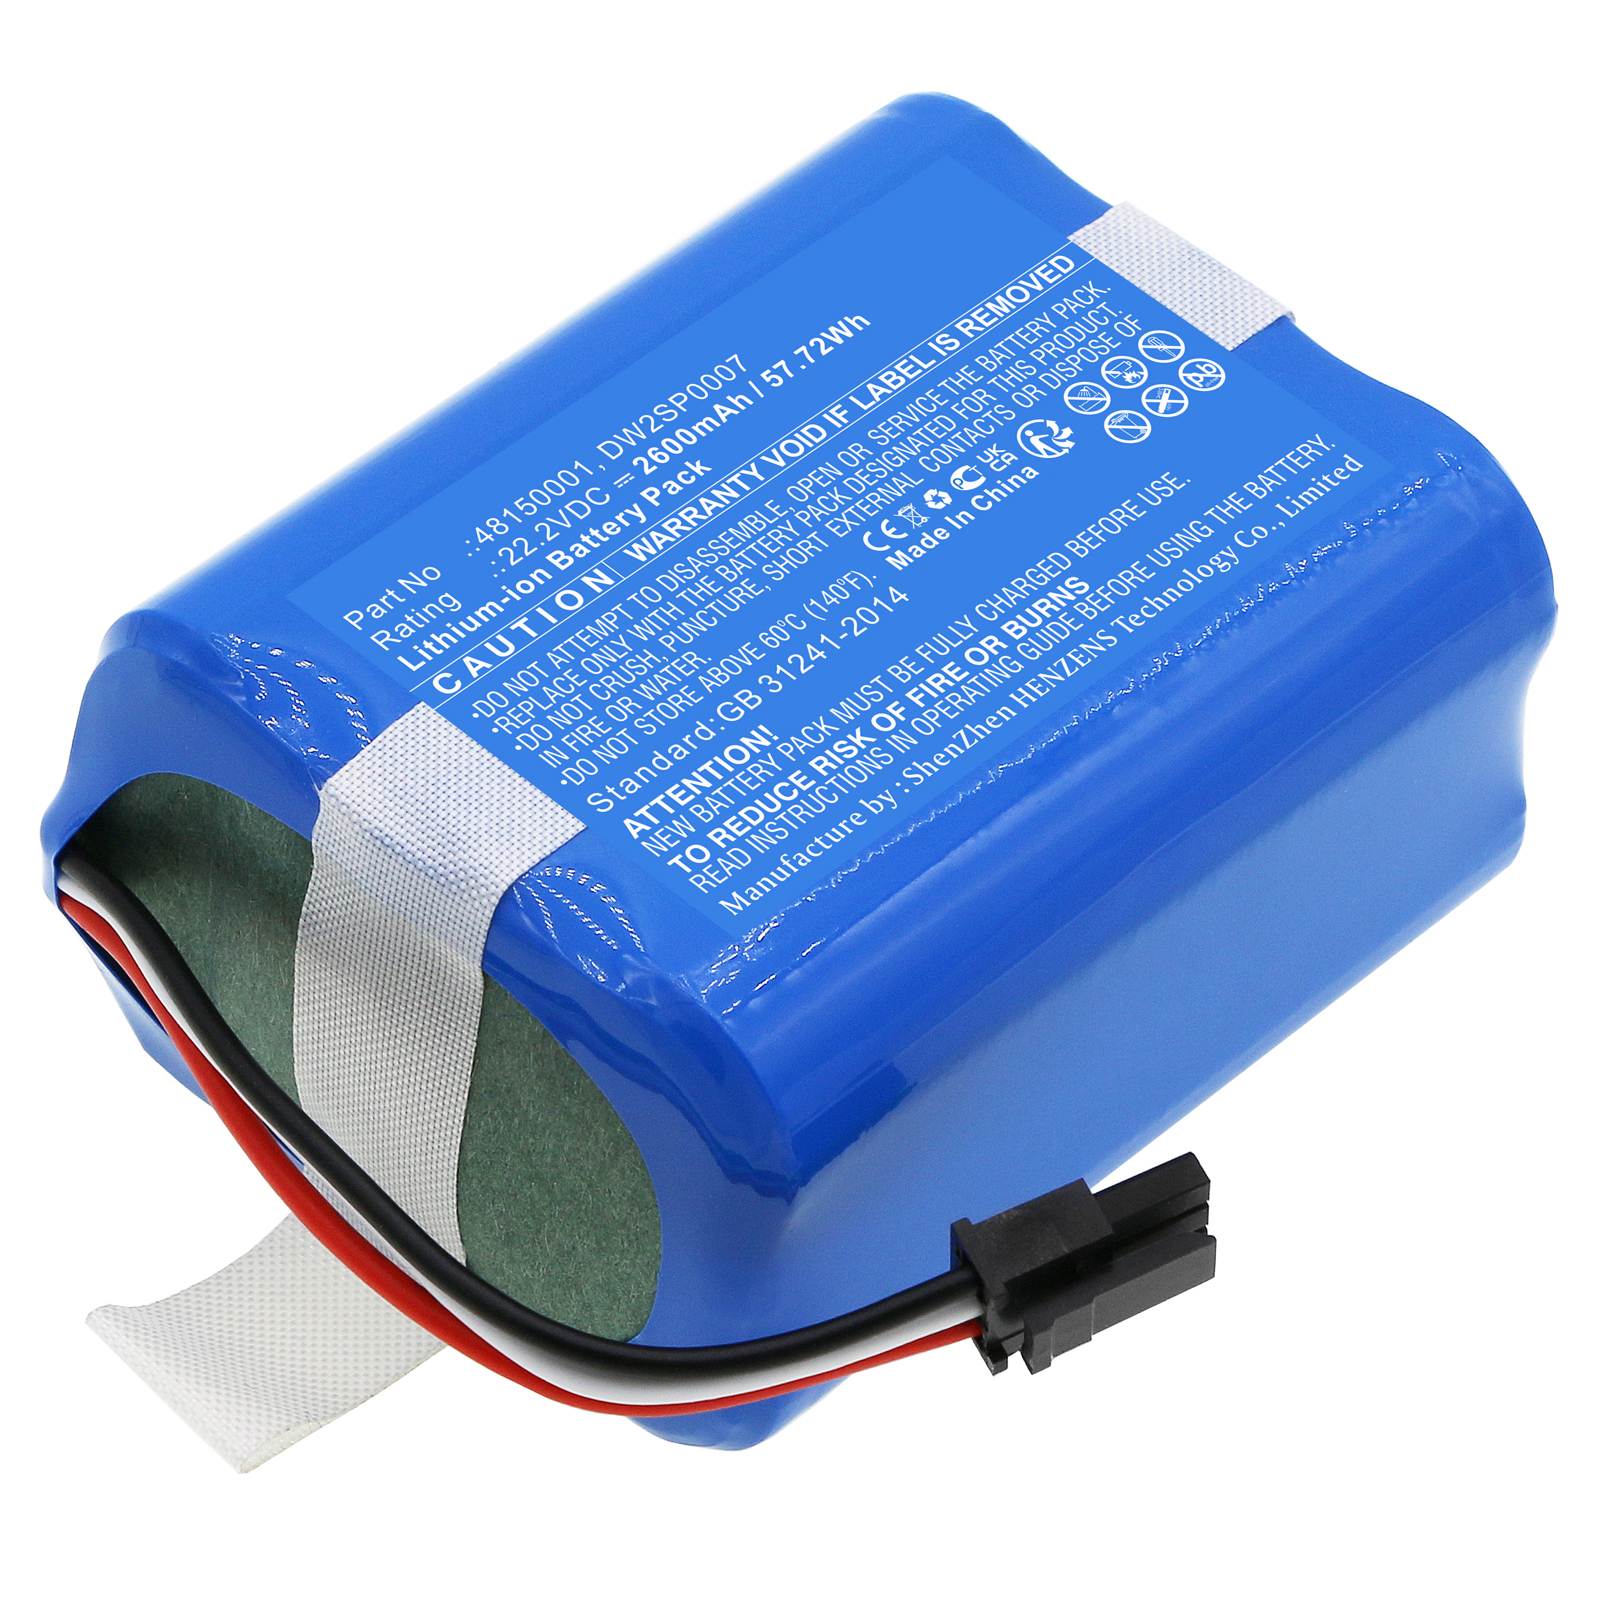 Synergy Digital Lawn Mower Battery, Compatible with Lawn Expert DW2SP0007 Lawn Mower Battery (Li-ion, 22.2V, 2600mAh)